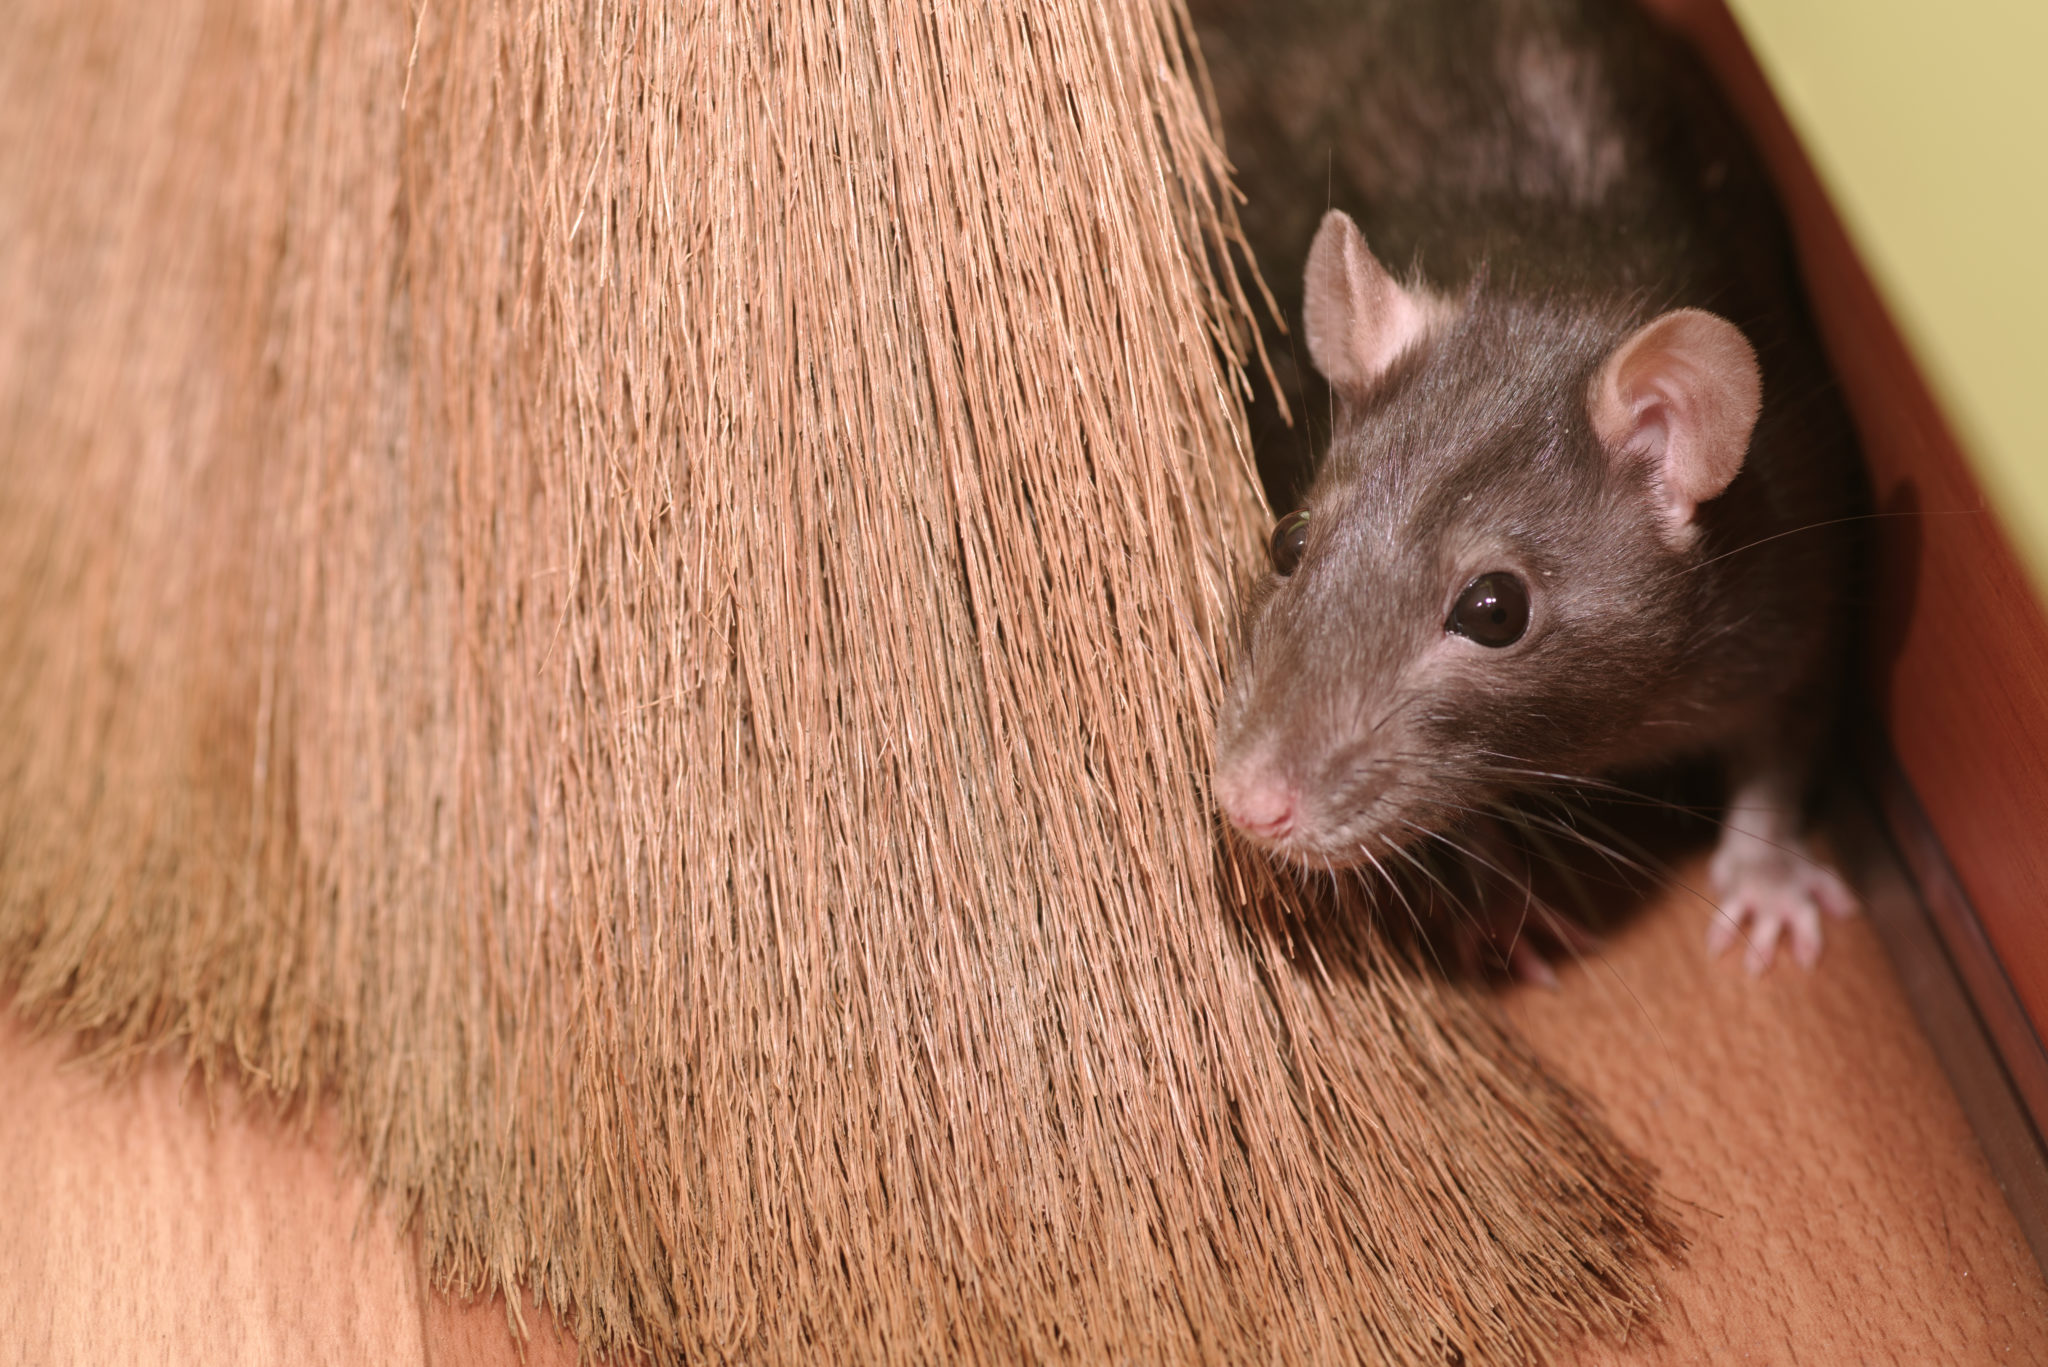 Rodent pest control in Newcastle for your home